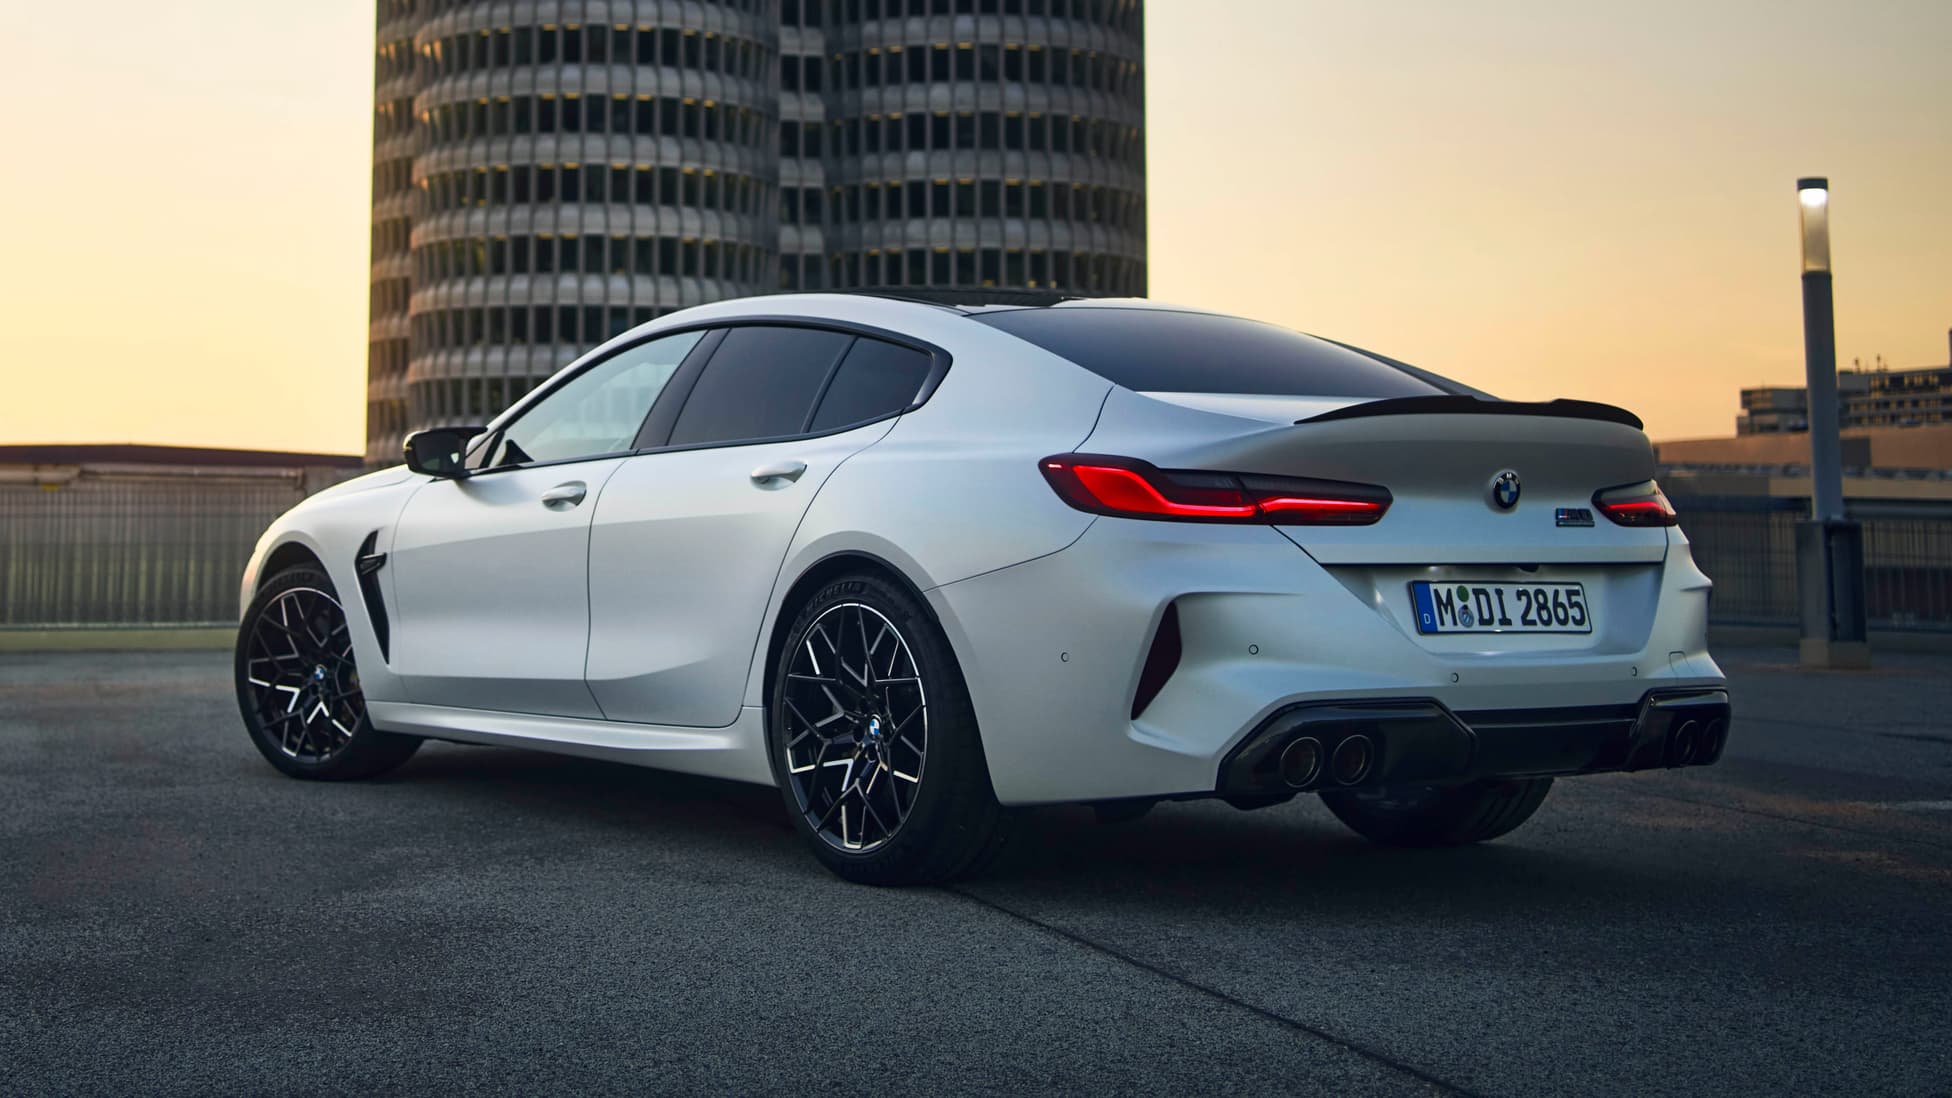 2022 BMW M8 Competition facelift, 2022 BMW M8 Competition updates, BMW M8 Competition facelift 2022, BMW M8 Competition updates 2022, BMW M8 Competition coupe updates, white bmw m8, bmw m8 coupe white, white bmw car